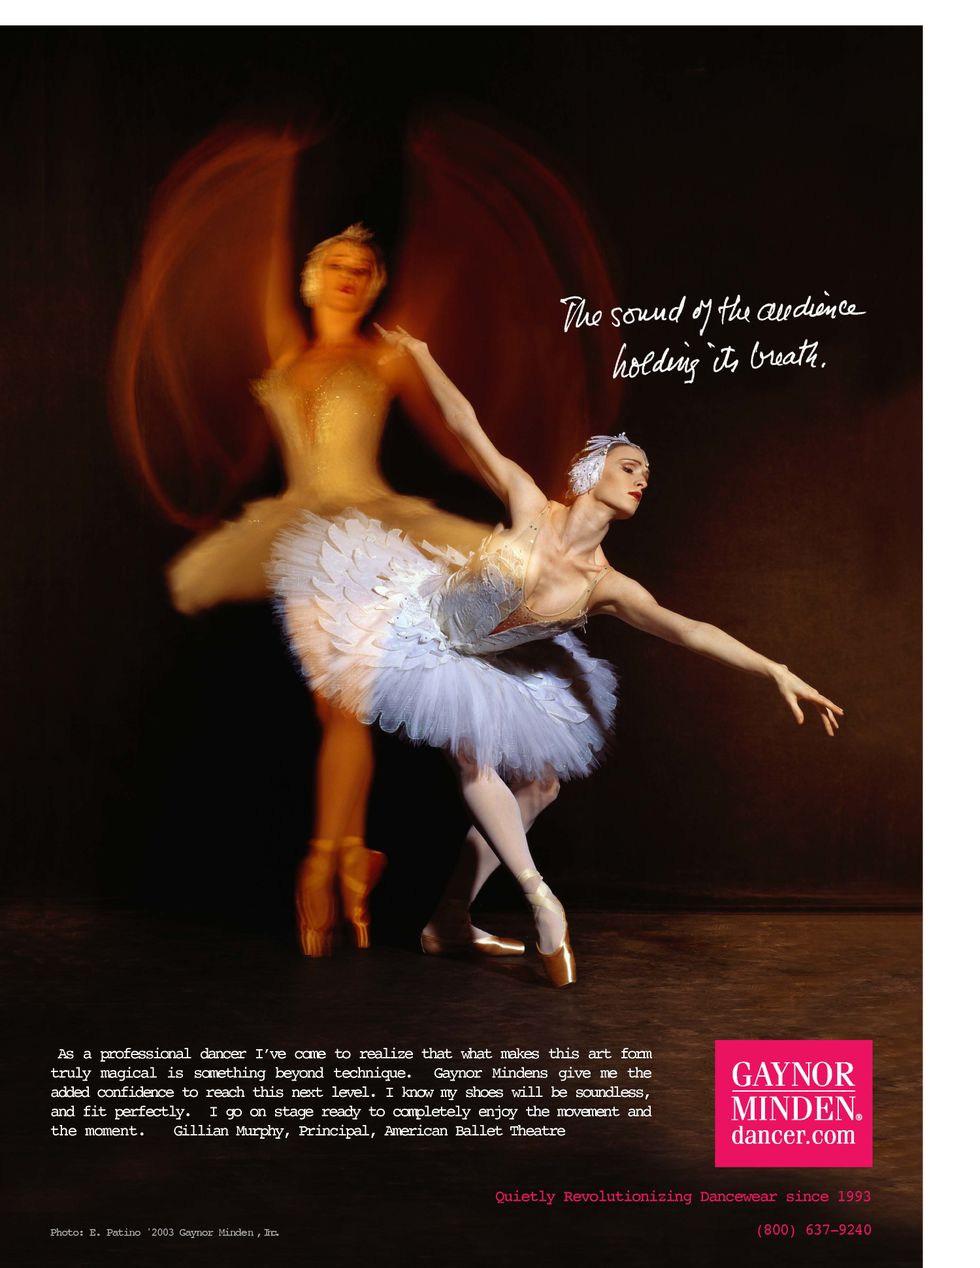 Full page ad of two photos of Gillian Murphy with a quote below, and pink Gaynor Minden logo